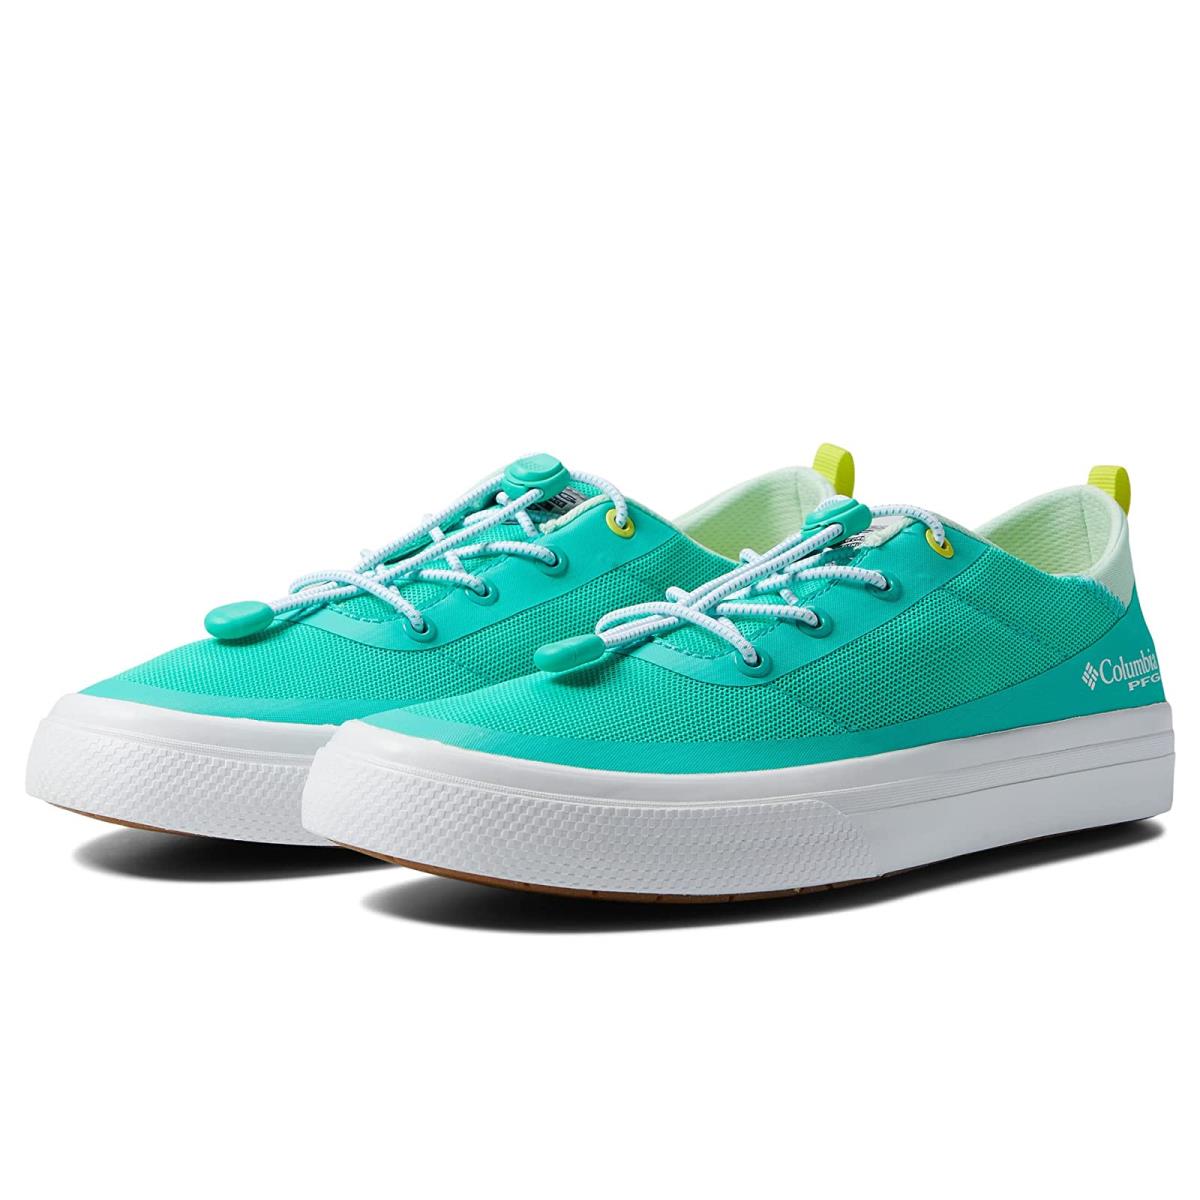 Woman`s Sneakers Athletic Shoes Columbia Bonehead Pfg Electric Turquoise/White